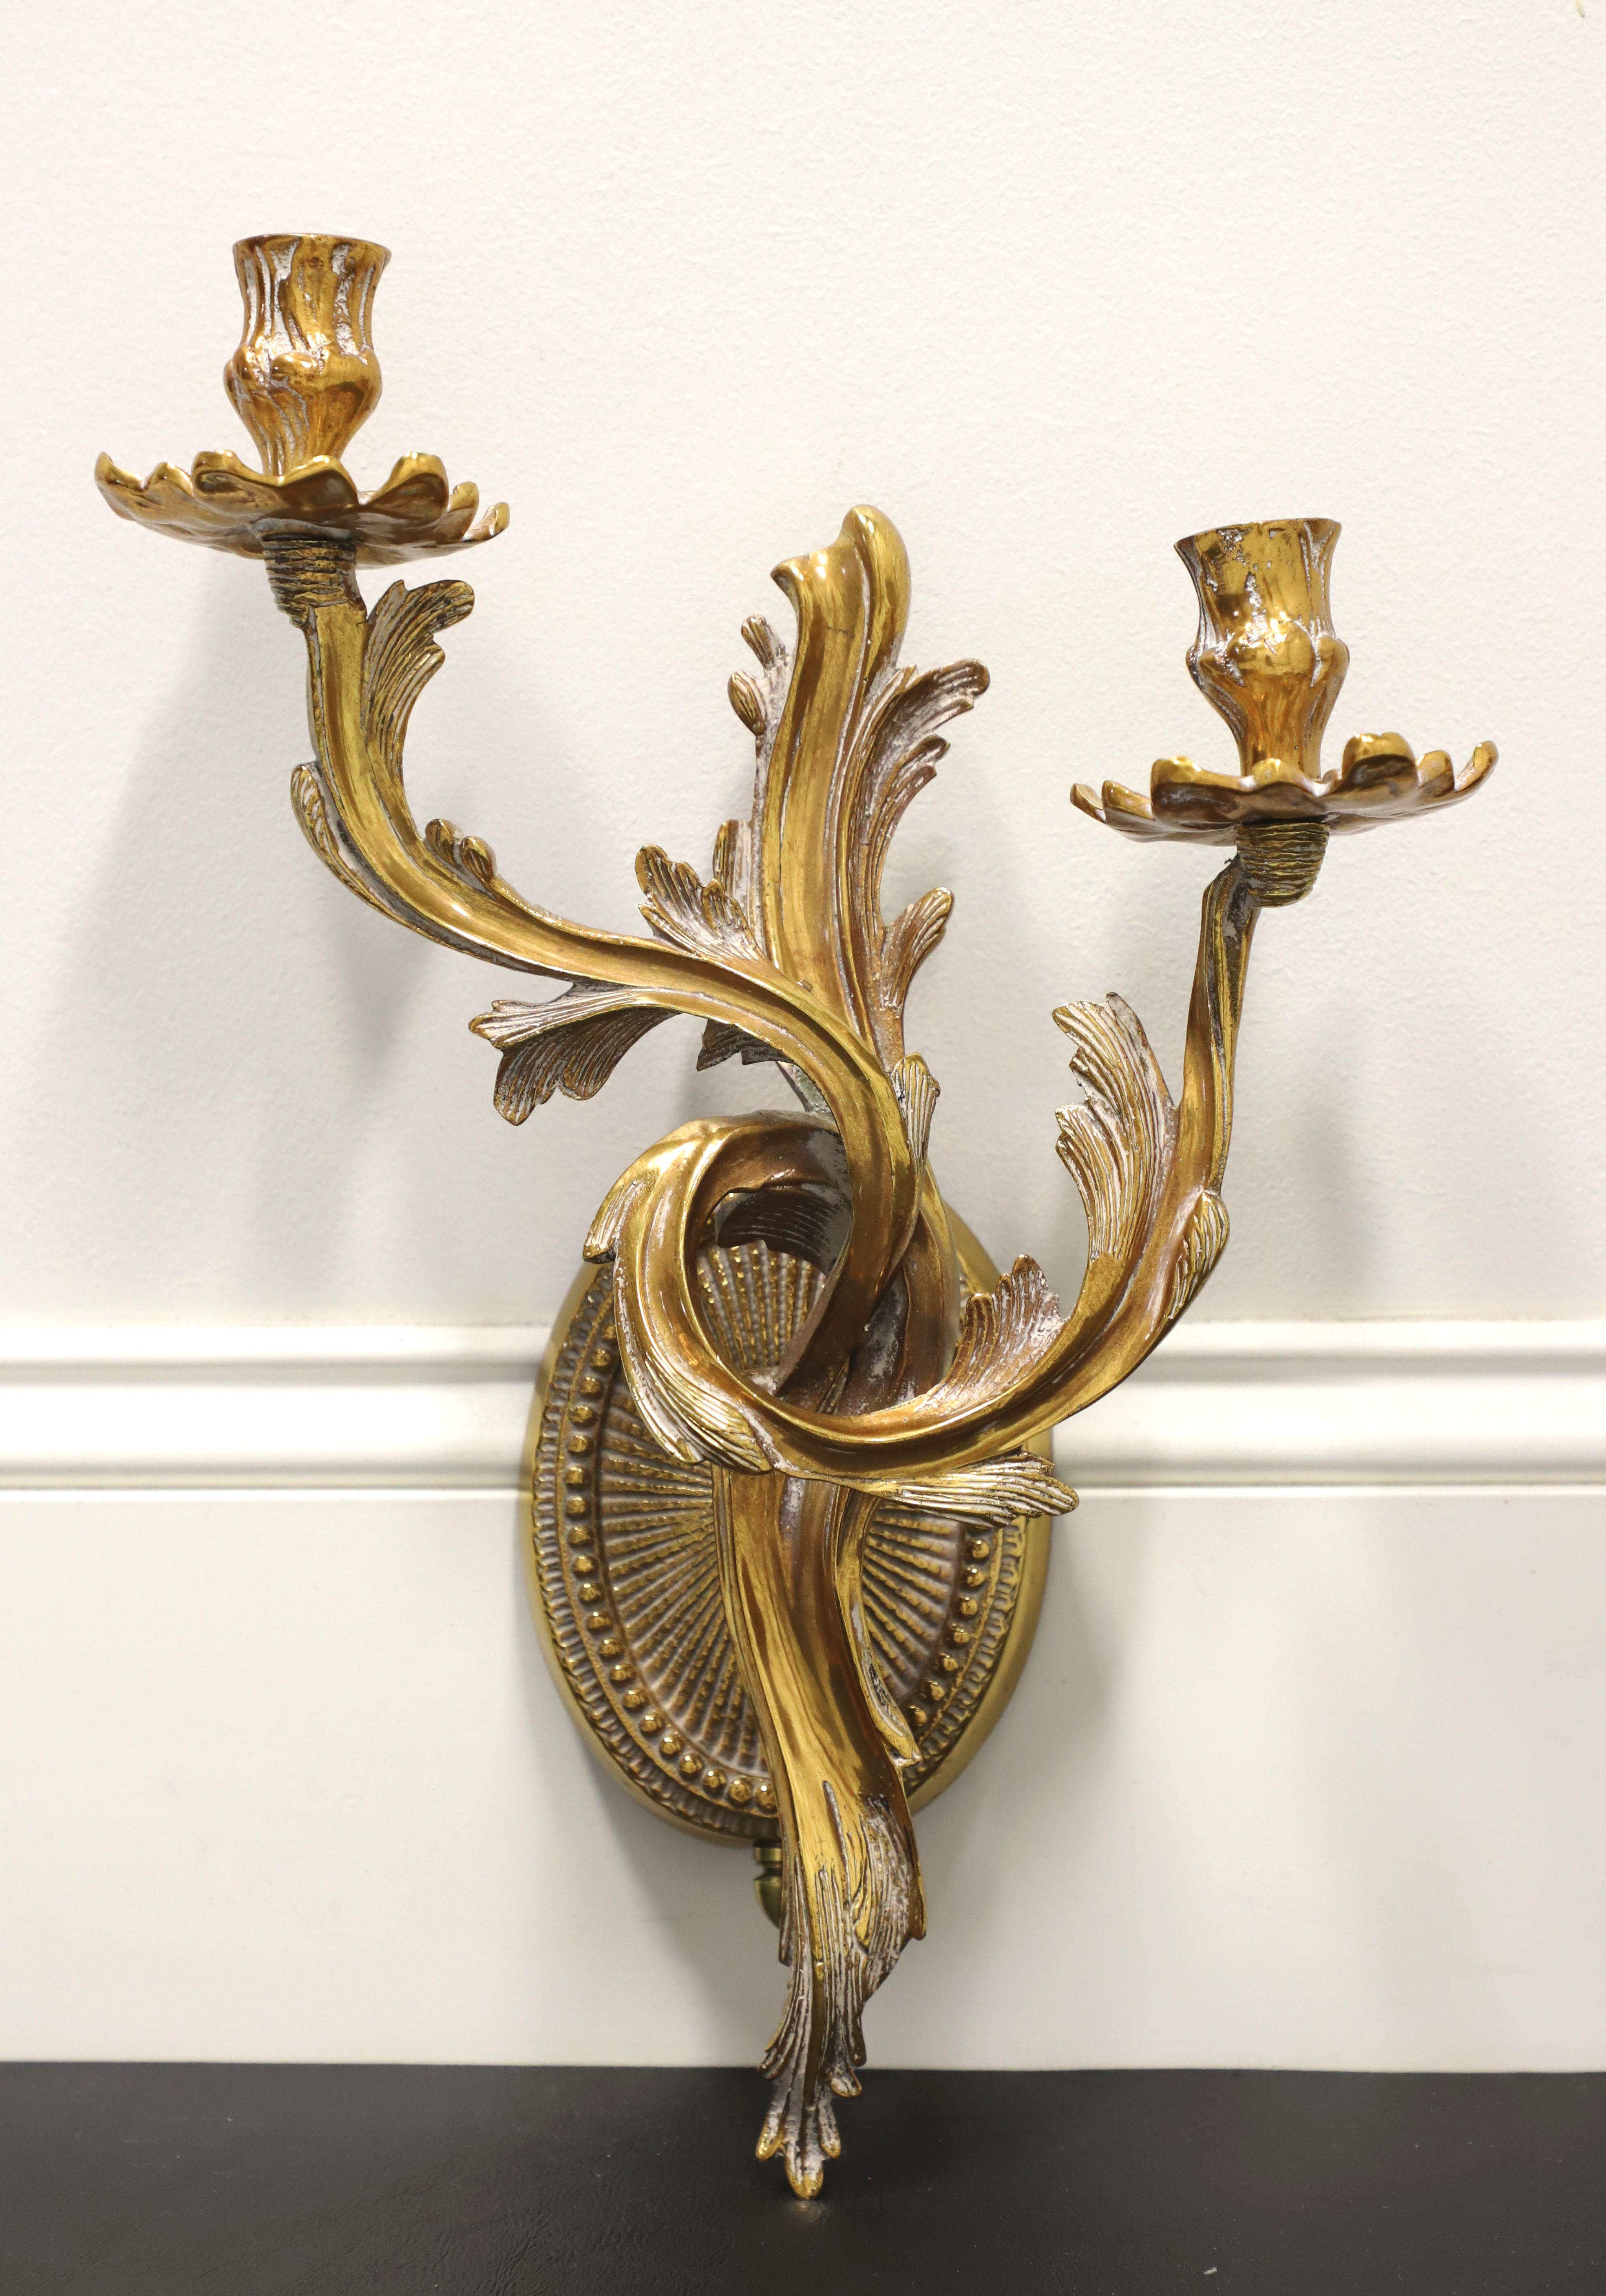 A pair of Rococo style candle wall sconces by Frederick Cooper. Solid brass decoratively sculpted in a swirl & acanthus leaves form, with two arms, two candleholders, and a decorative oval wall plate. Wall mounting accessories are included. Made in